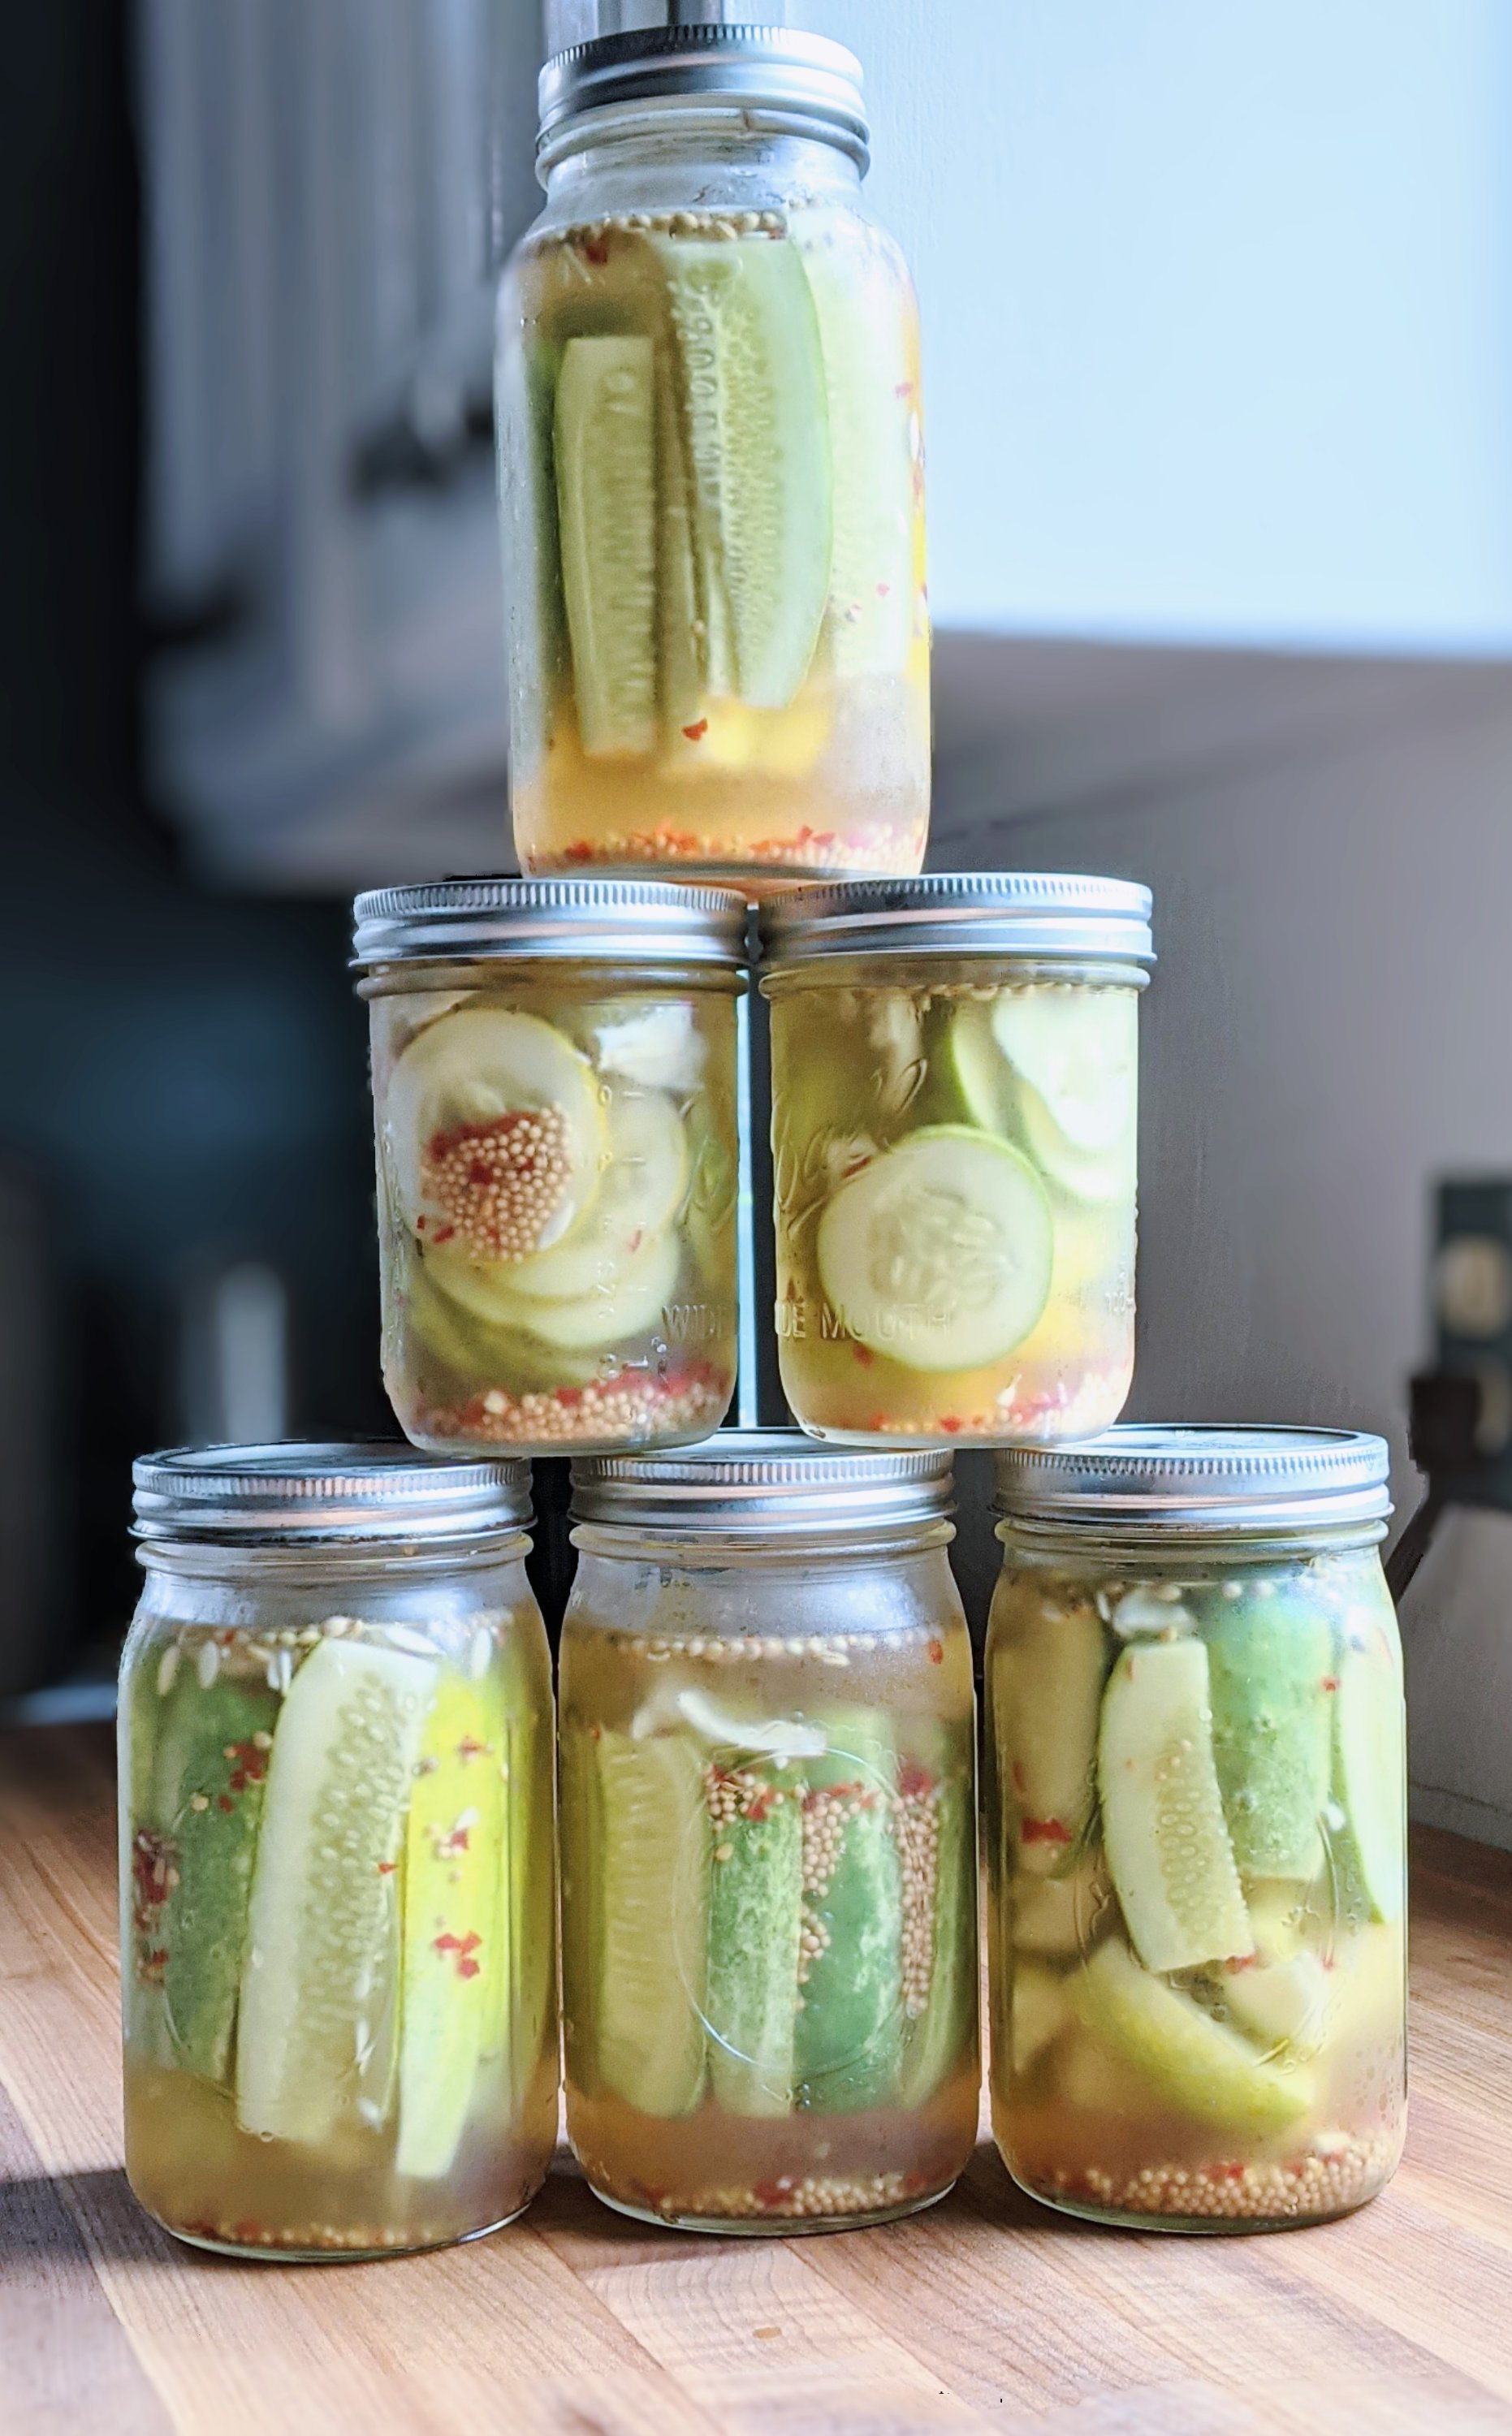 fresh garlic pickles without dill no dill pickles refrigerator garlic pickles without dill recipe garden pickles in 1 day no canning recipe